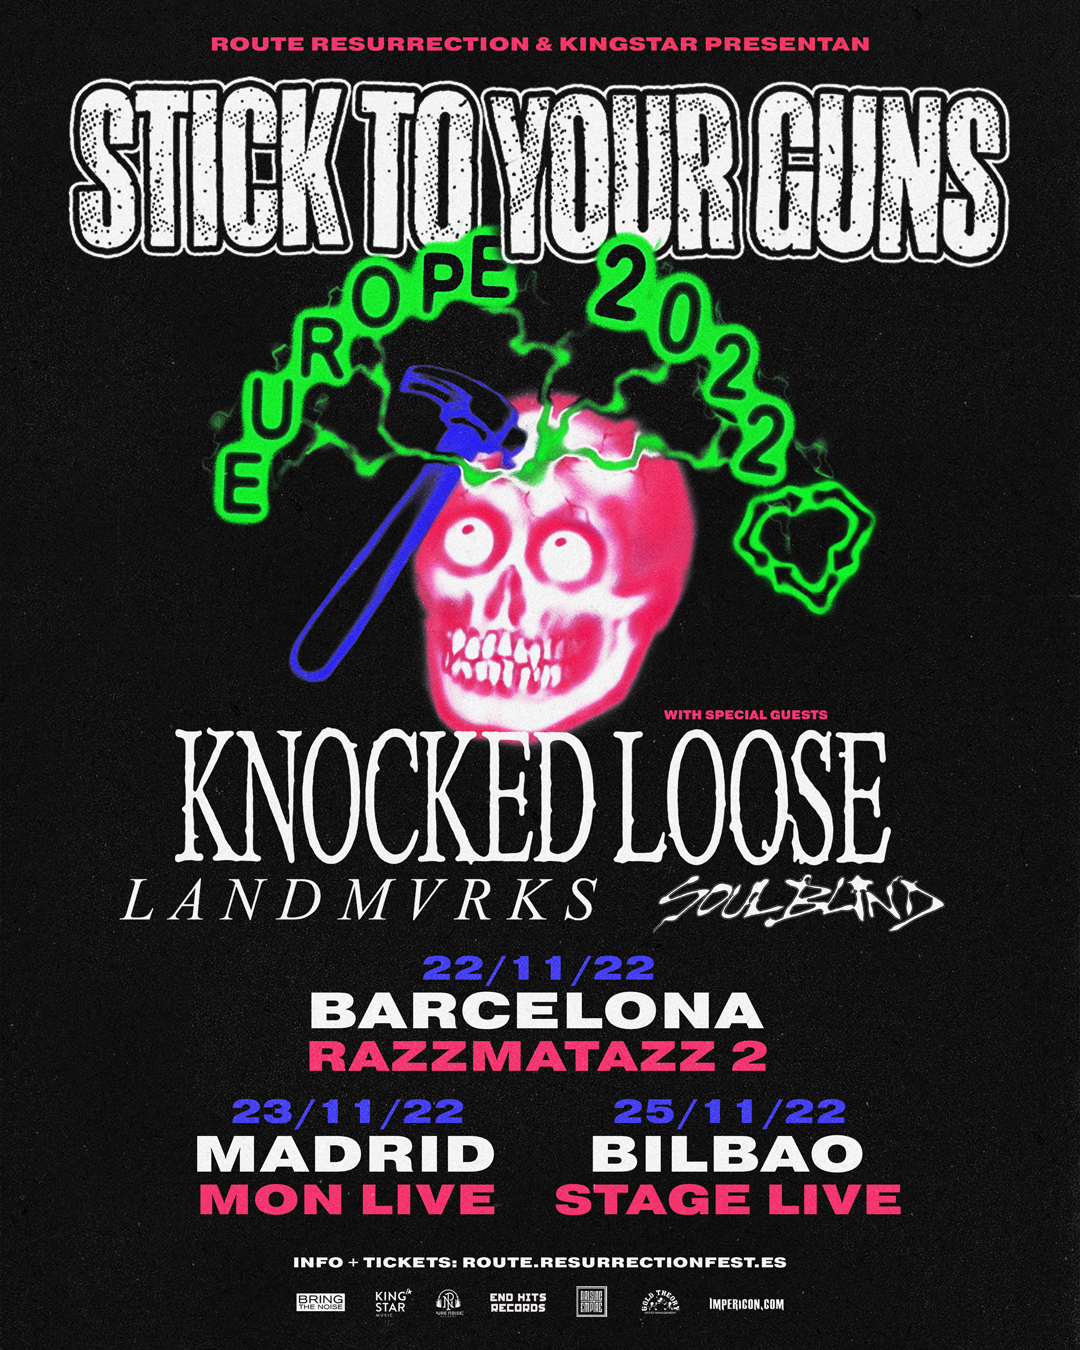 Nuevo Route Resurrection: Stick To Your Guns con Knocked Loose, Landmvrks y Soul Blind.